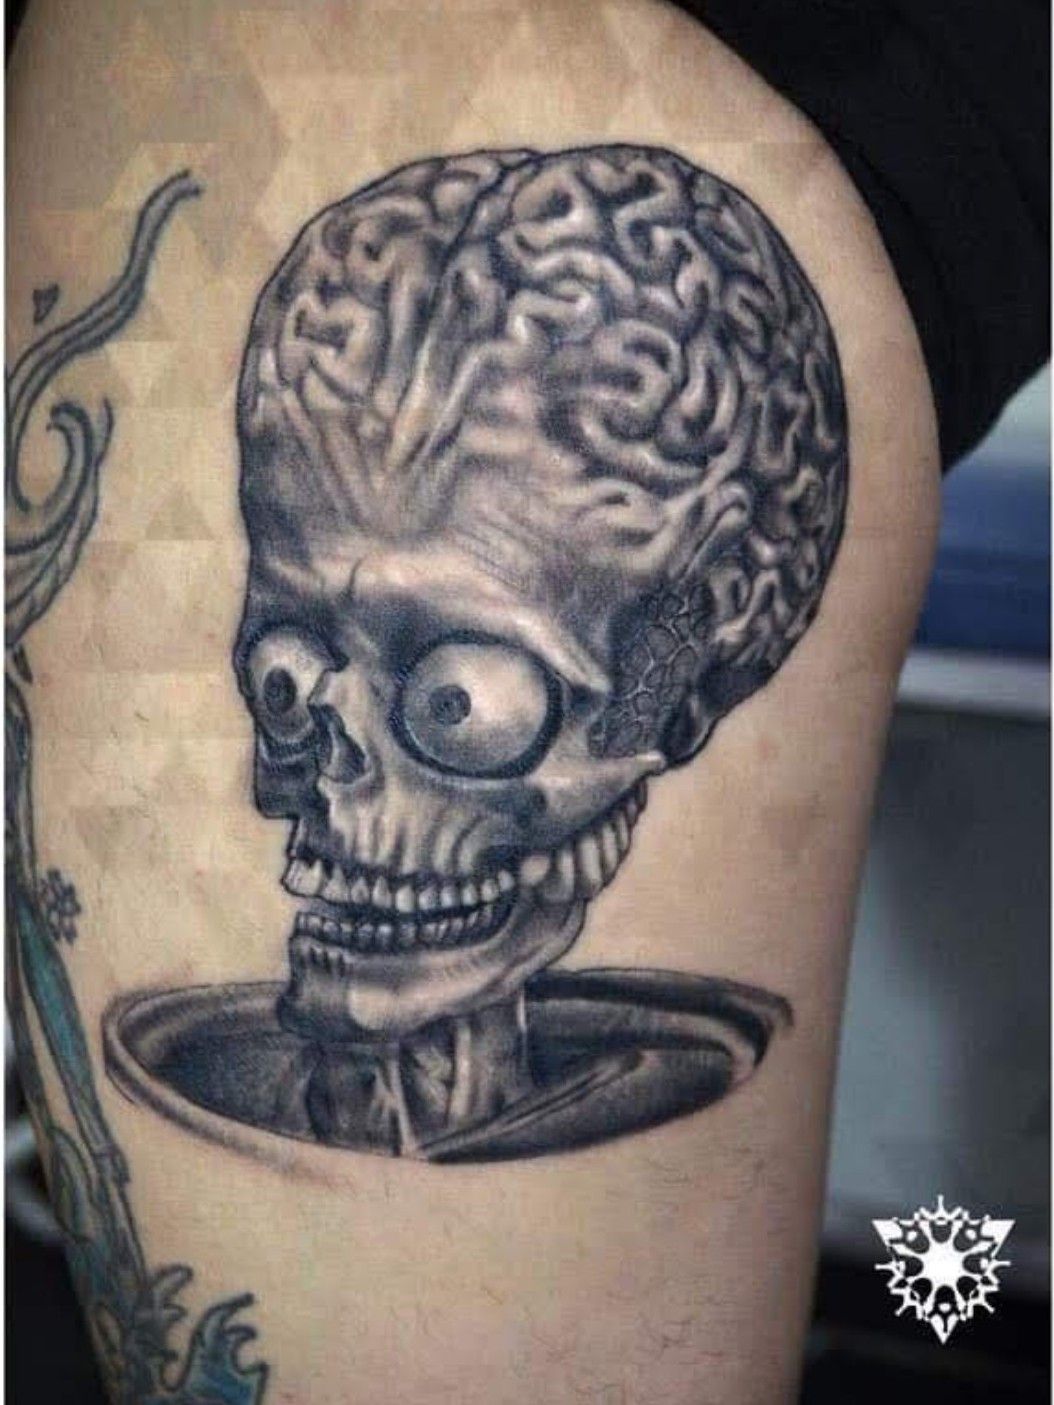 Mars Attacks by Josh Grable at West Loop Tattoo Collective Chicago  r tattoos